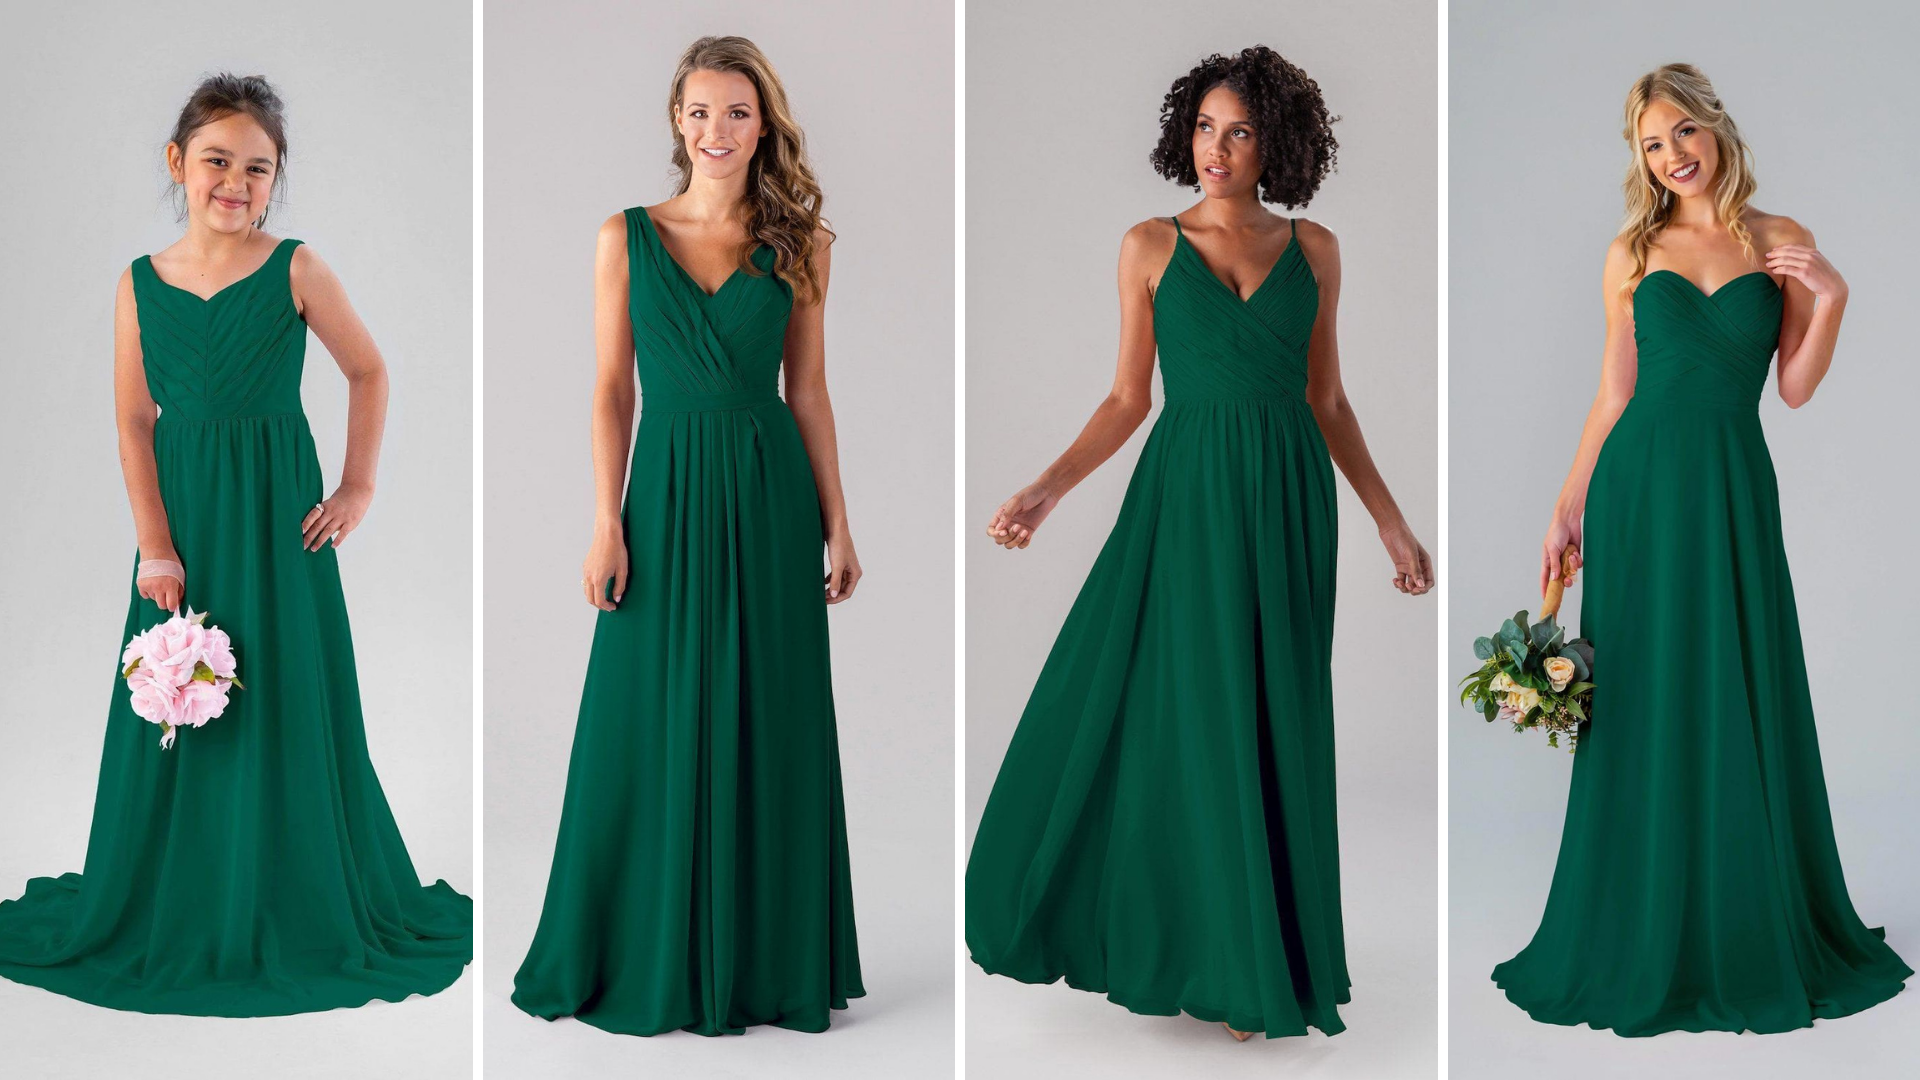 Models wearing Kennedy Blue Bridesmaid Dresses in styles "Amelia", "Alexis", and "Lisa".